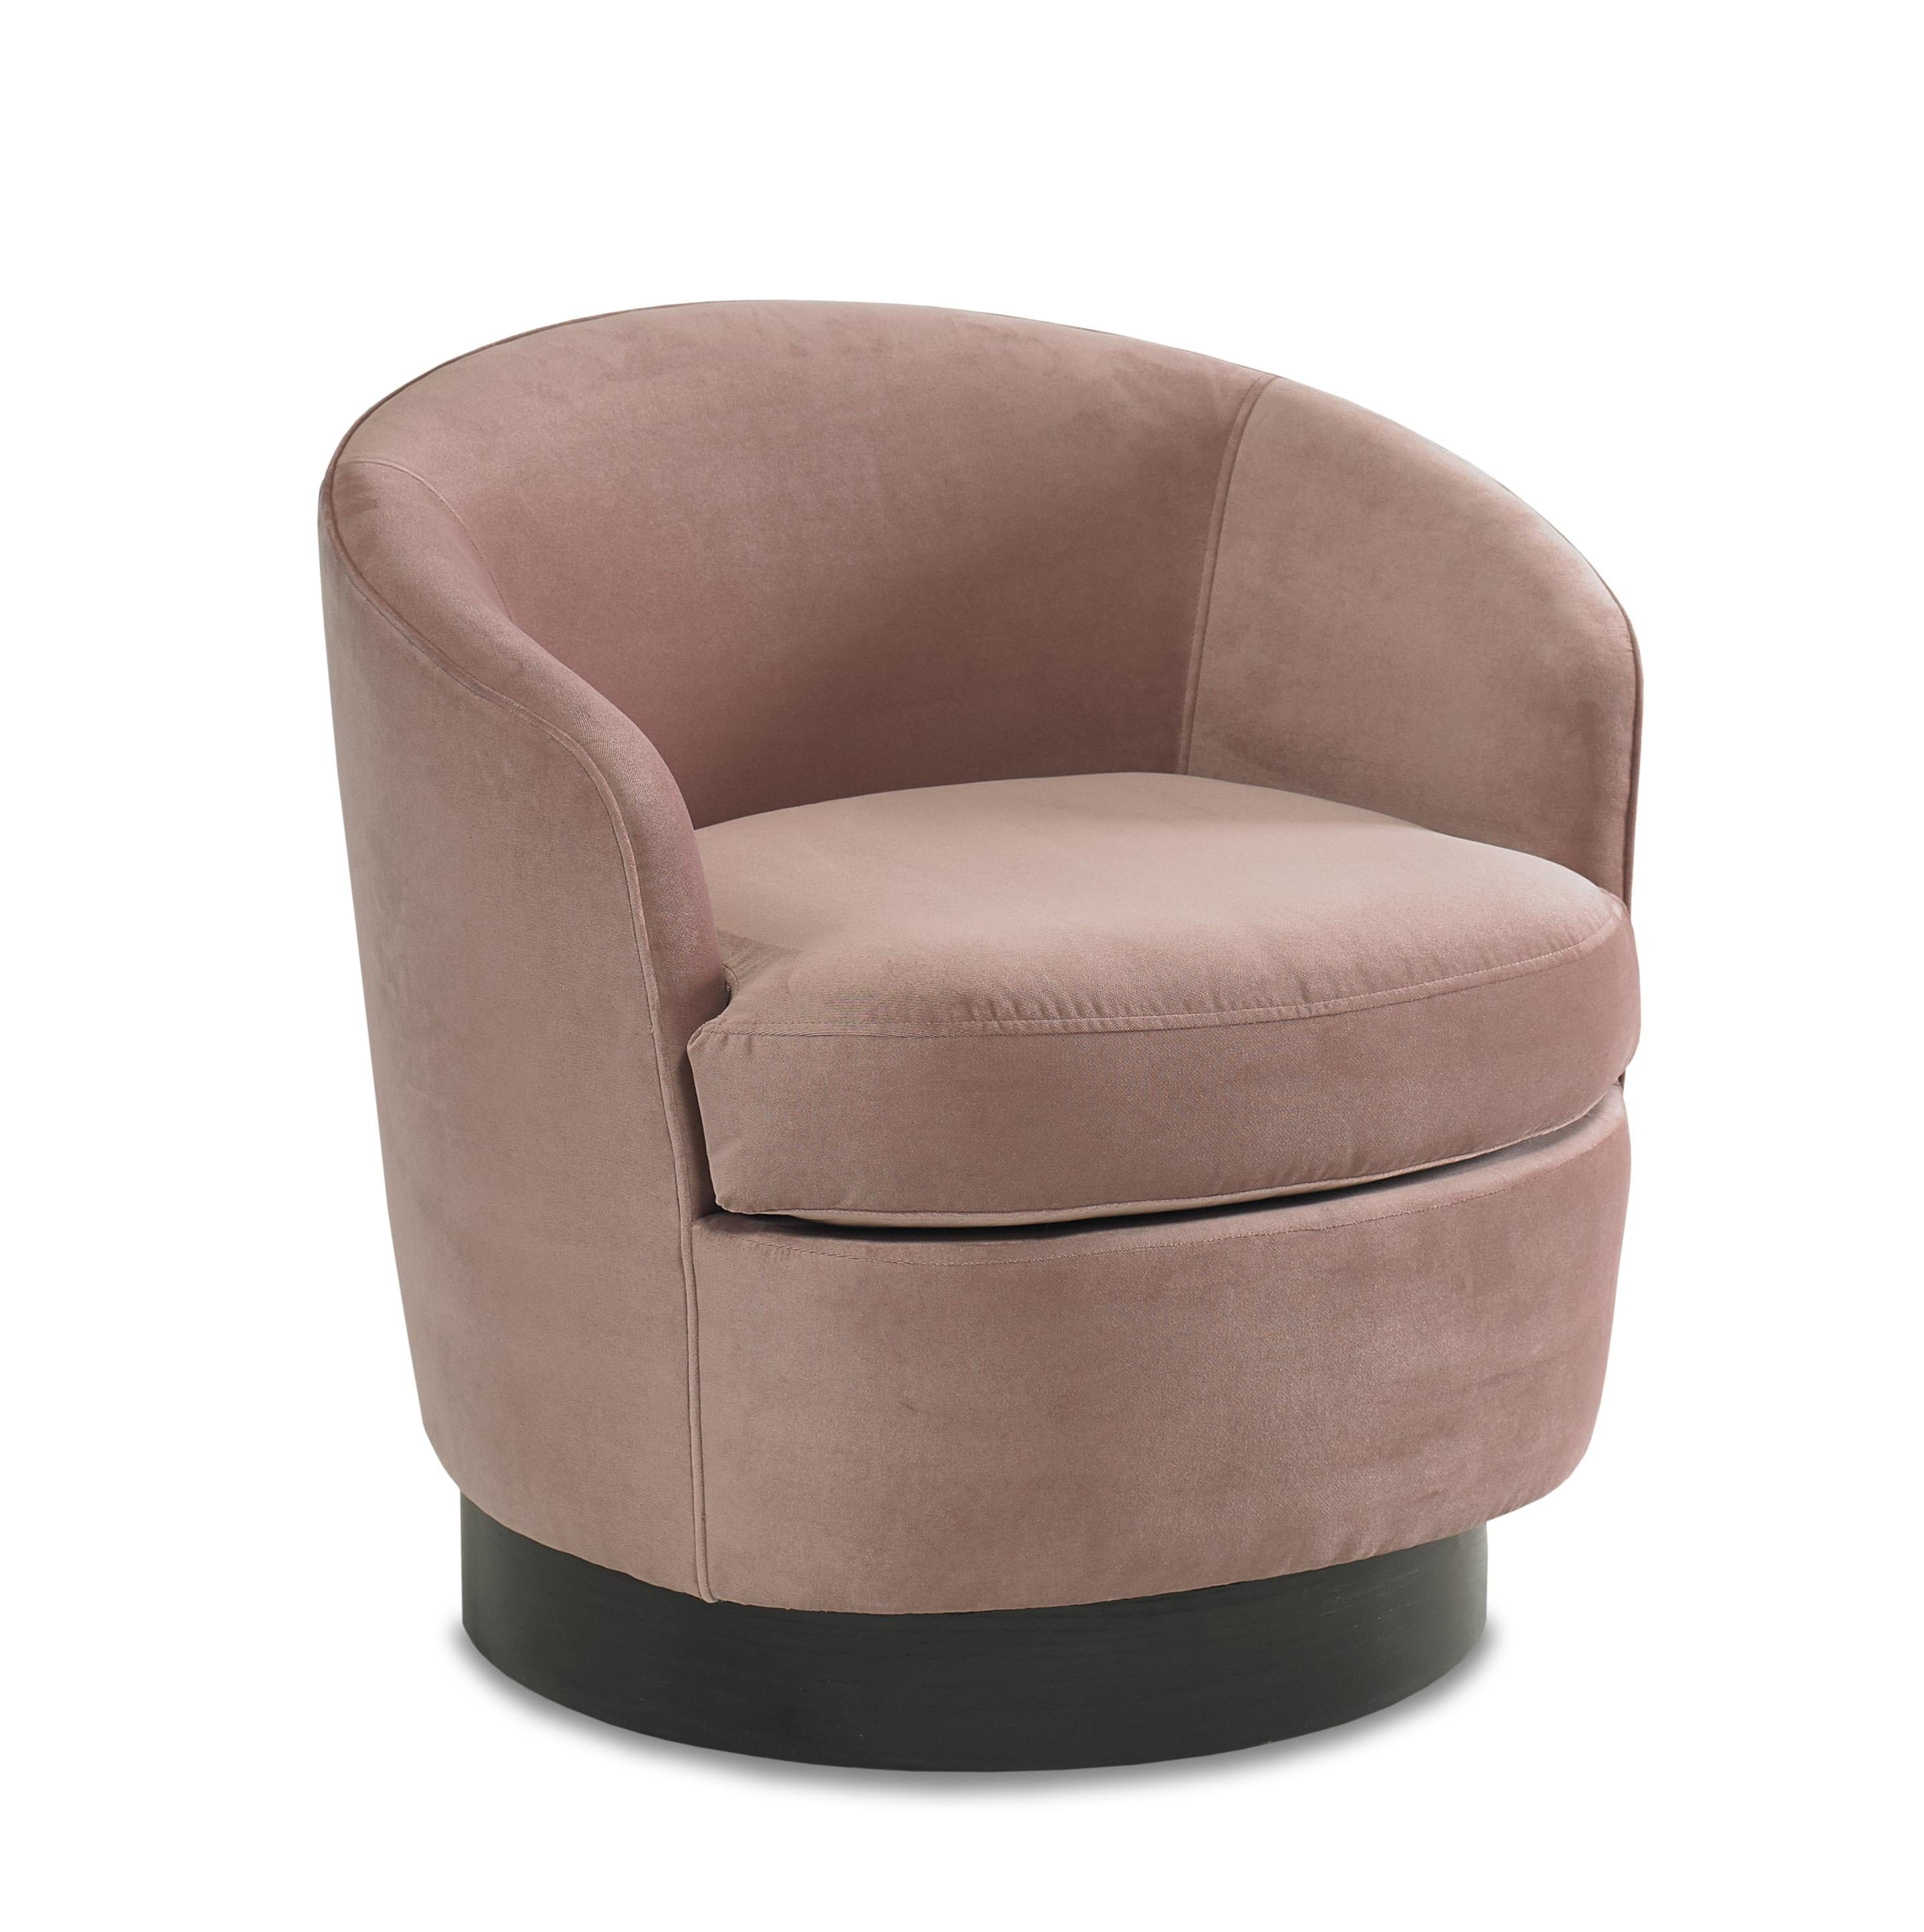 Upholstered Round Swivel Chair – English Country Home